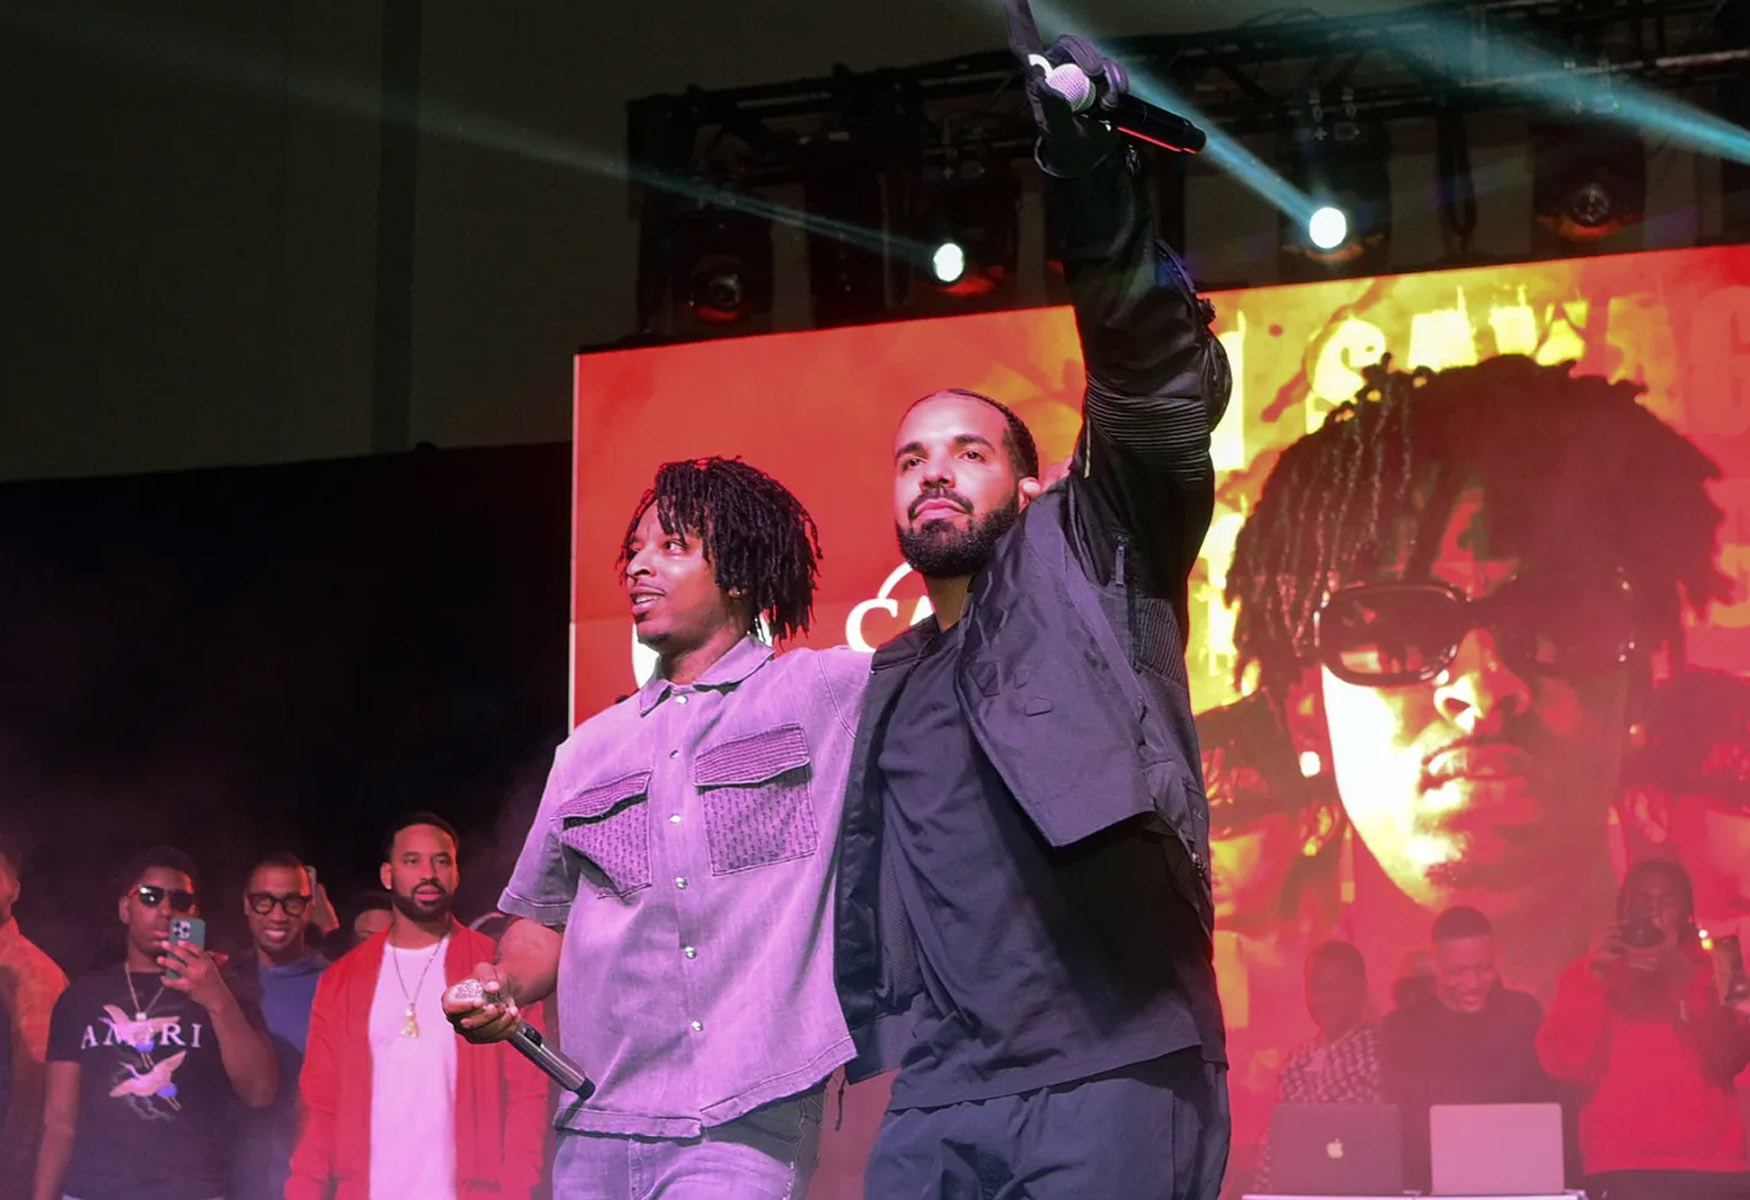 21 Savage Joins Drake On Stage In Canada Following Entry Denial